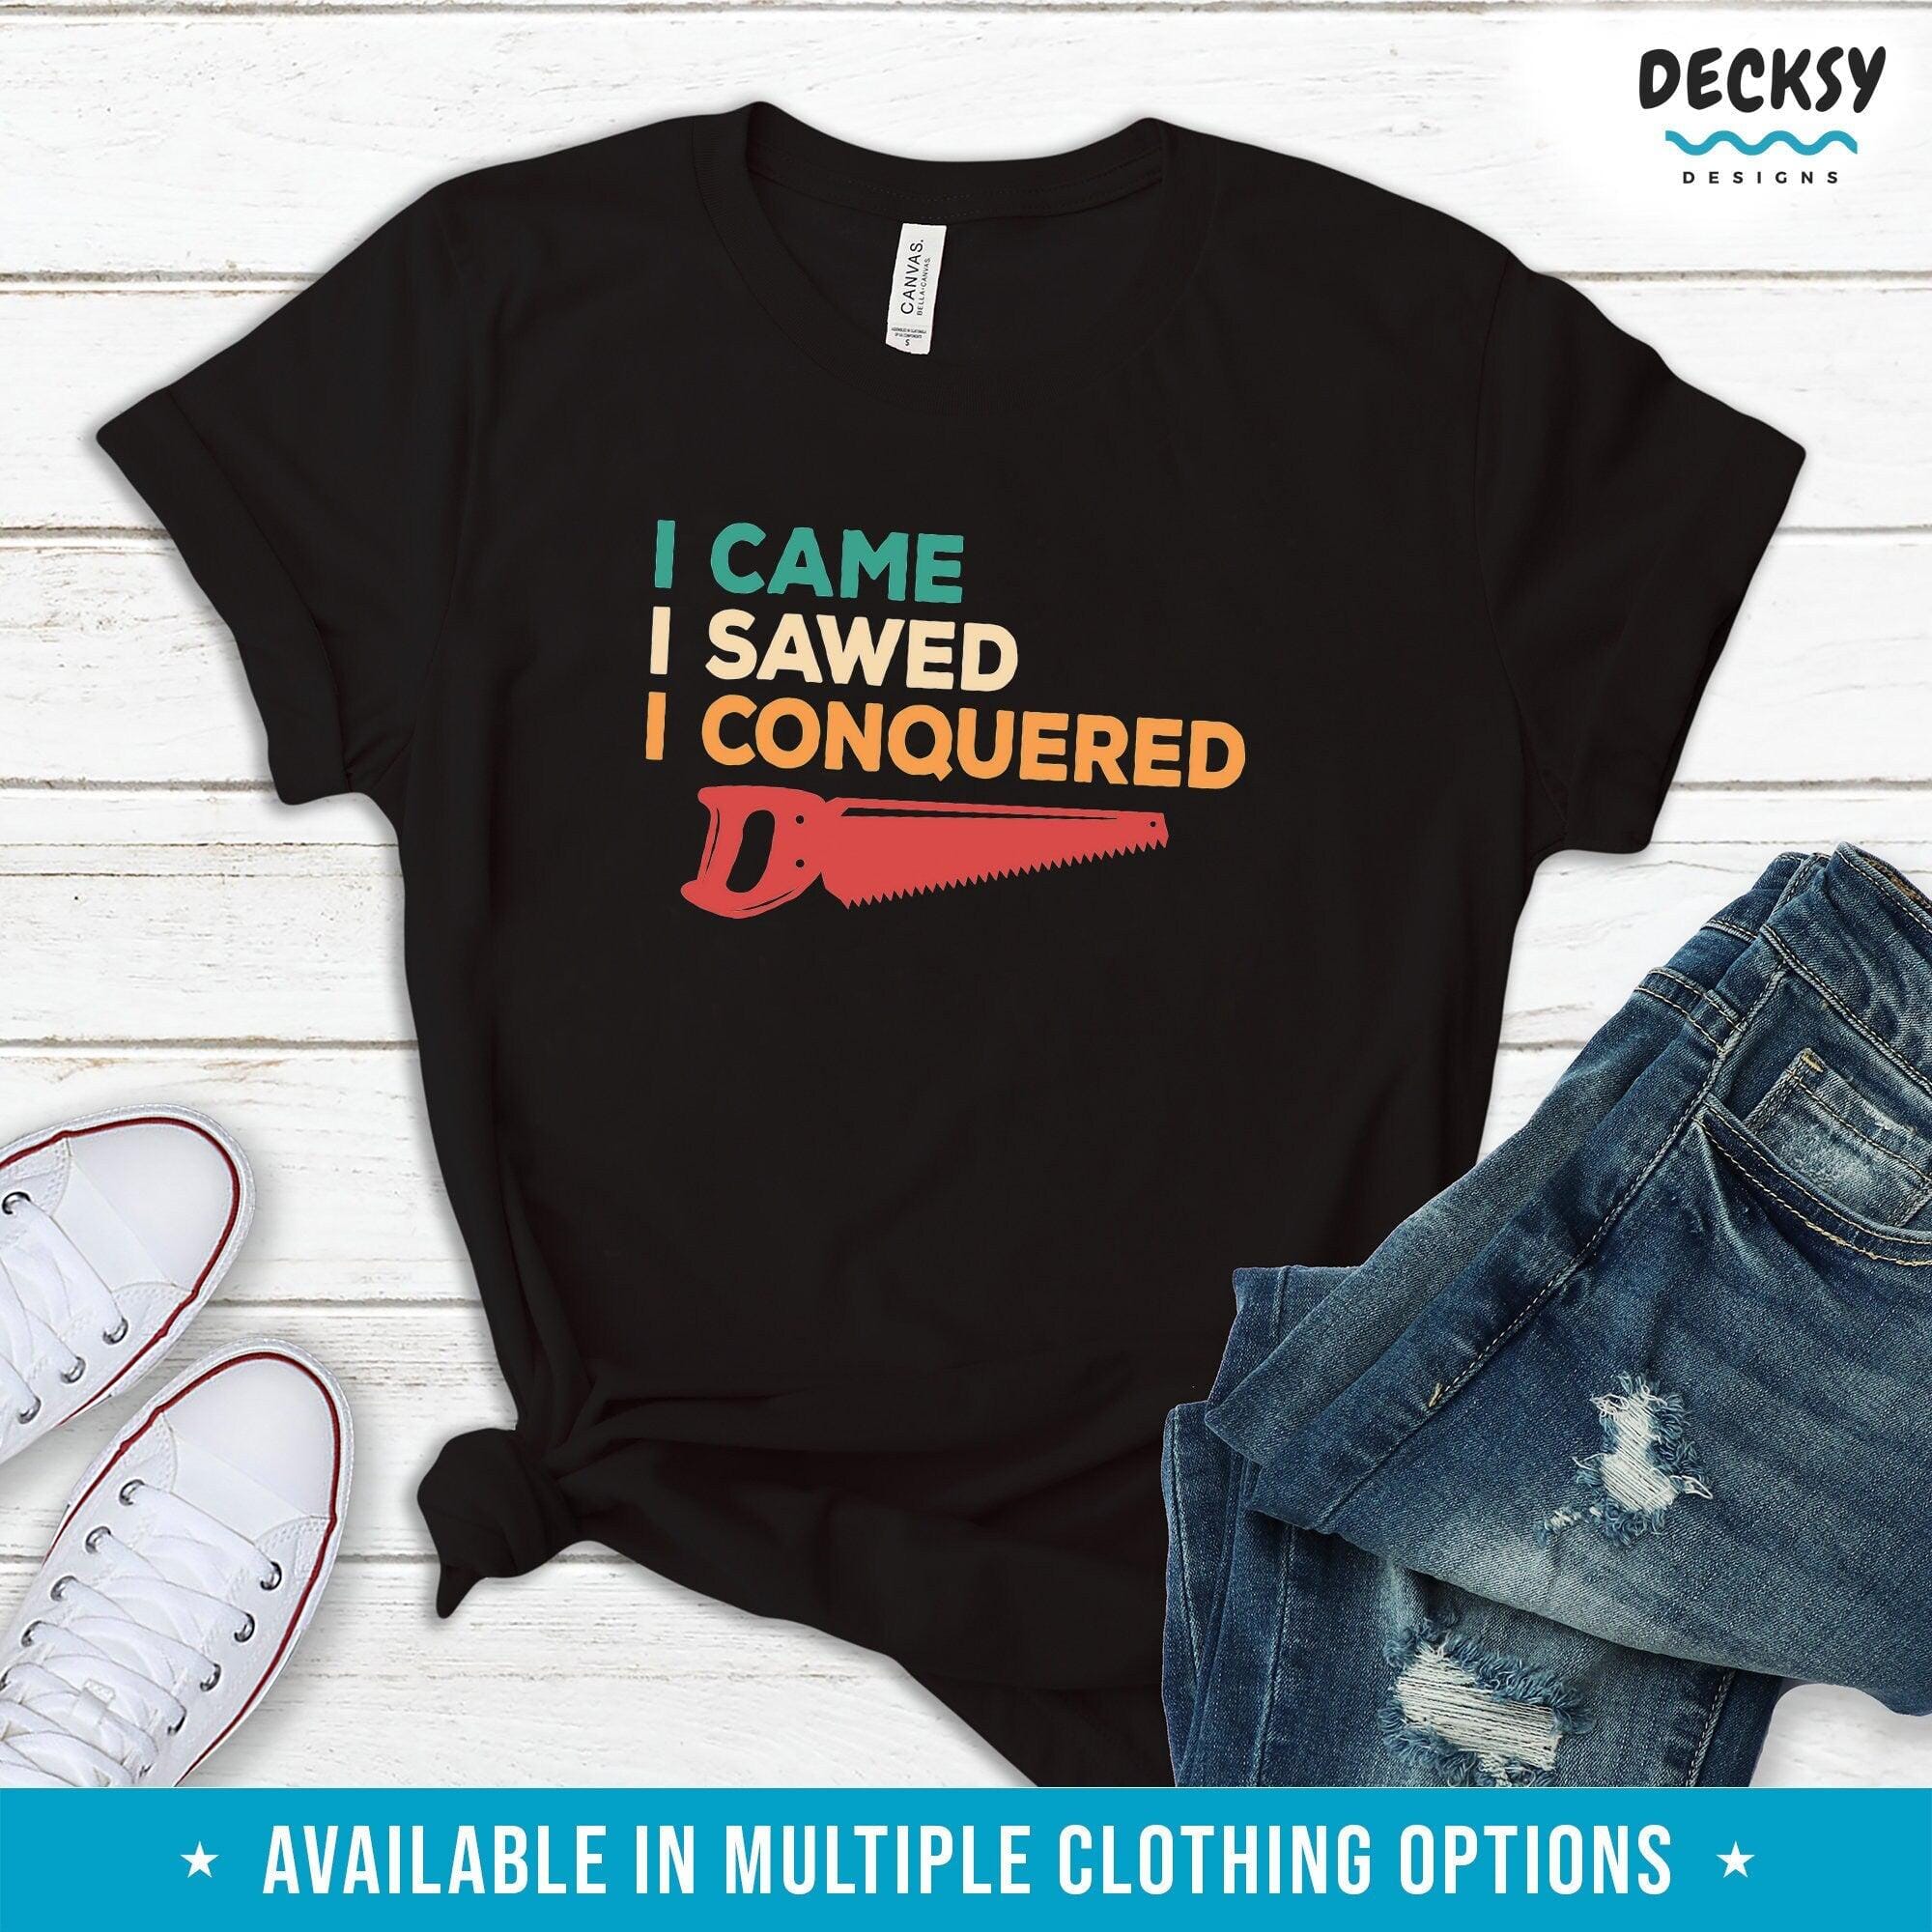 Carpenter Shirt, Woodworking Gift-Clothing:Gender-Neutral Adult Clothing:Tops & Tees:T-shirts:Graphic Tees-DecksyDesigns